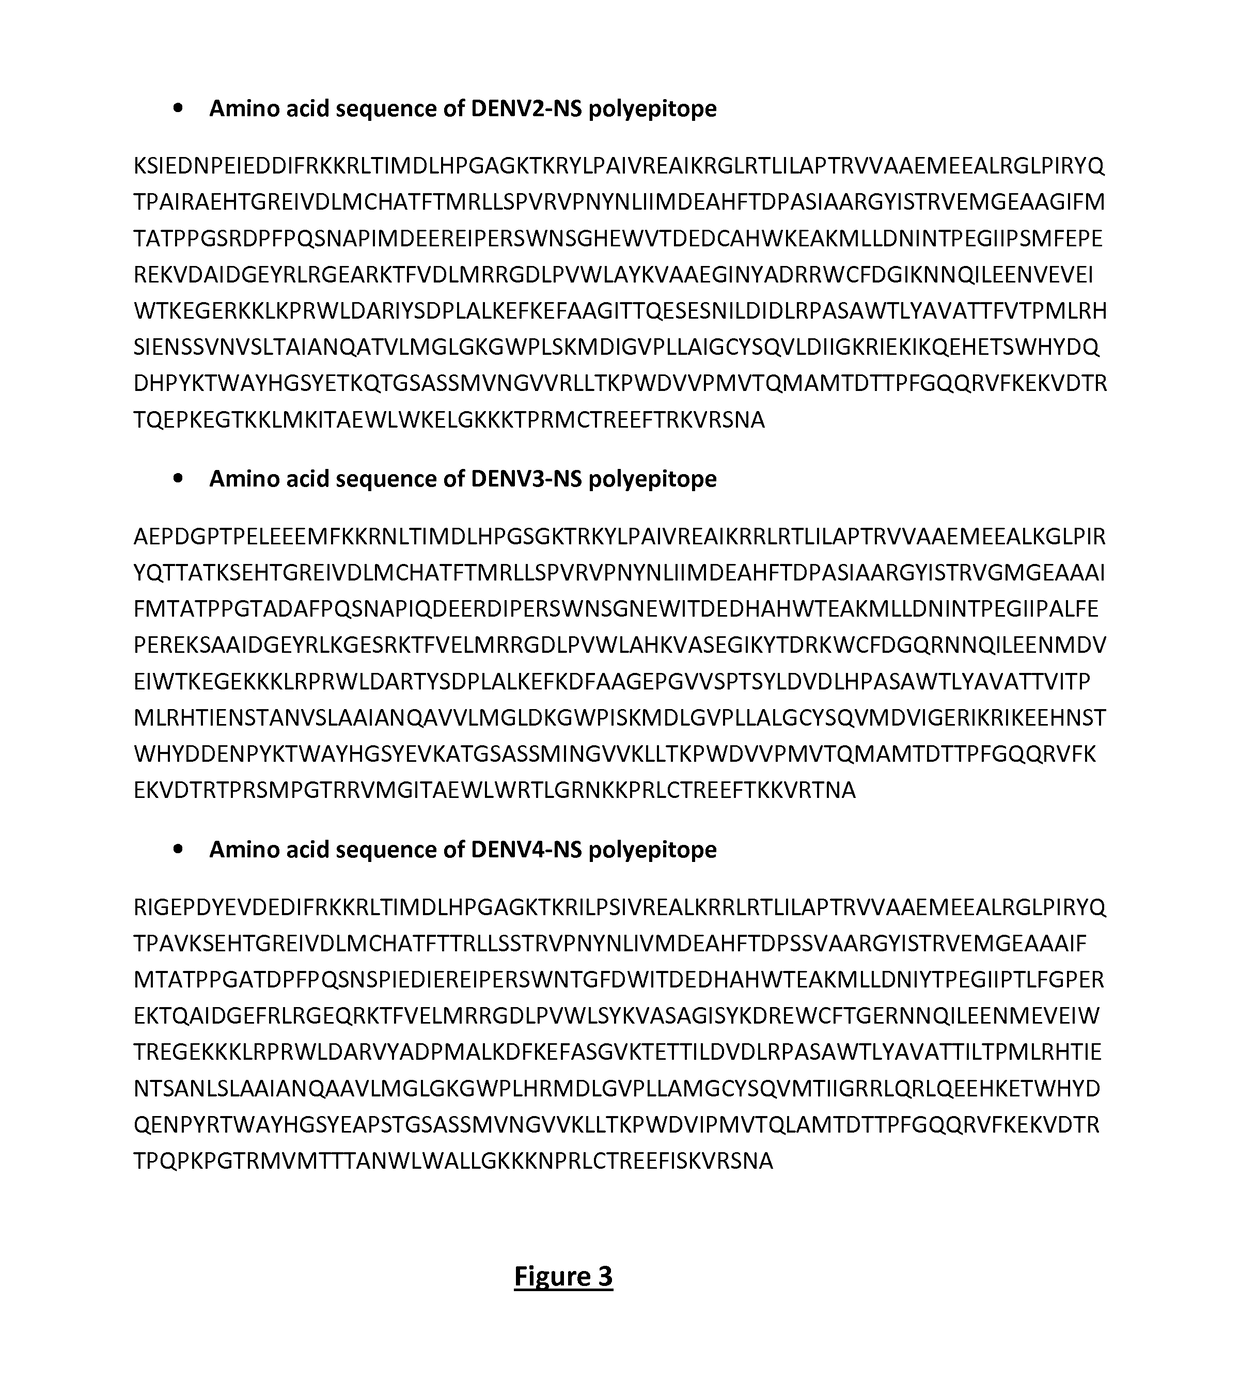 A dengue virus chimeric polyepitope composed of fragments of non-structural proteins and its use in an immunogenic composition against dengue virus infection